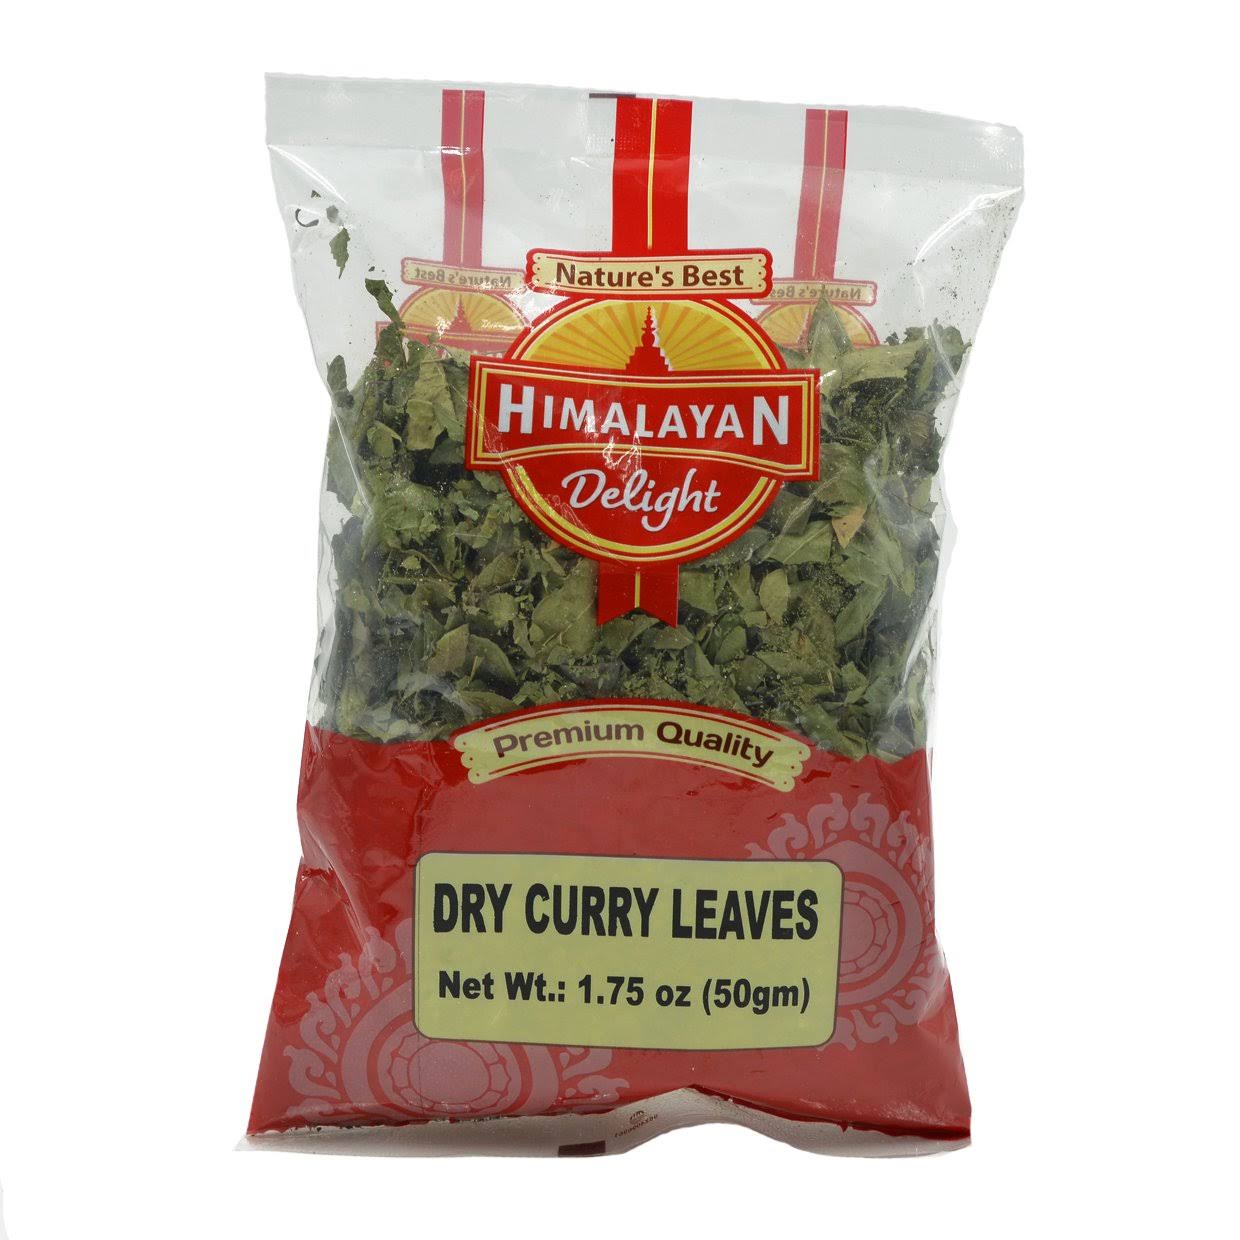 Nature's Best Himalayan Delight Dry Curry Leaves - 50g